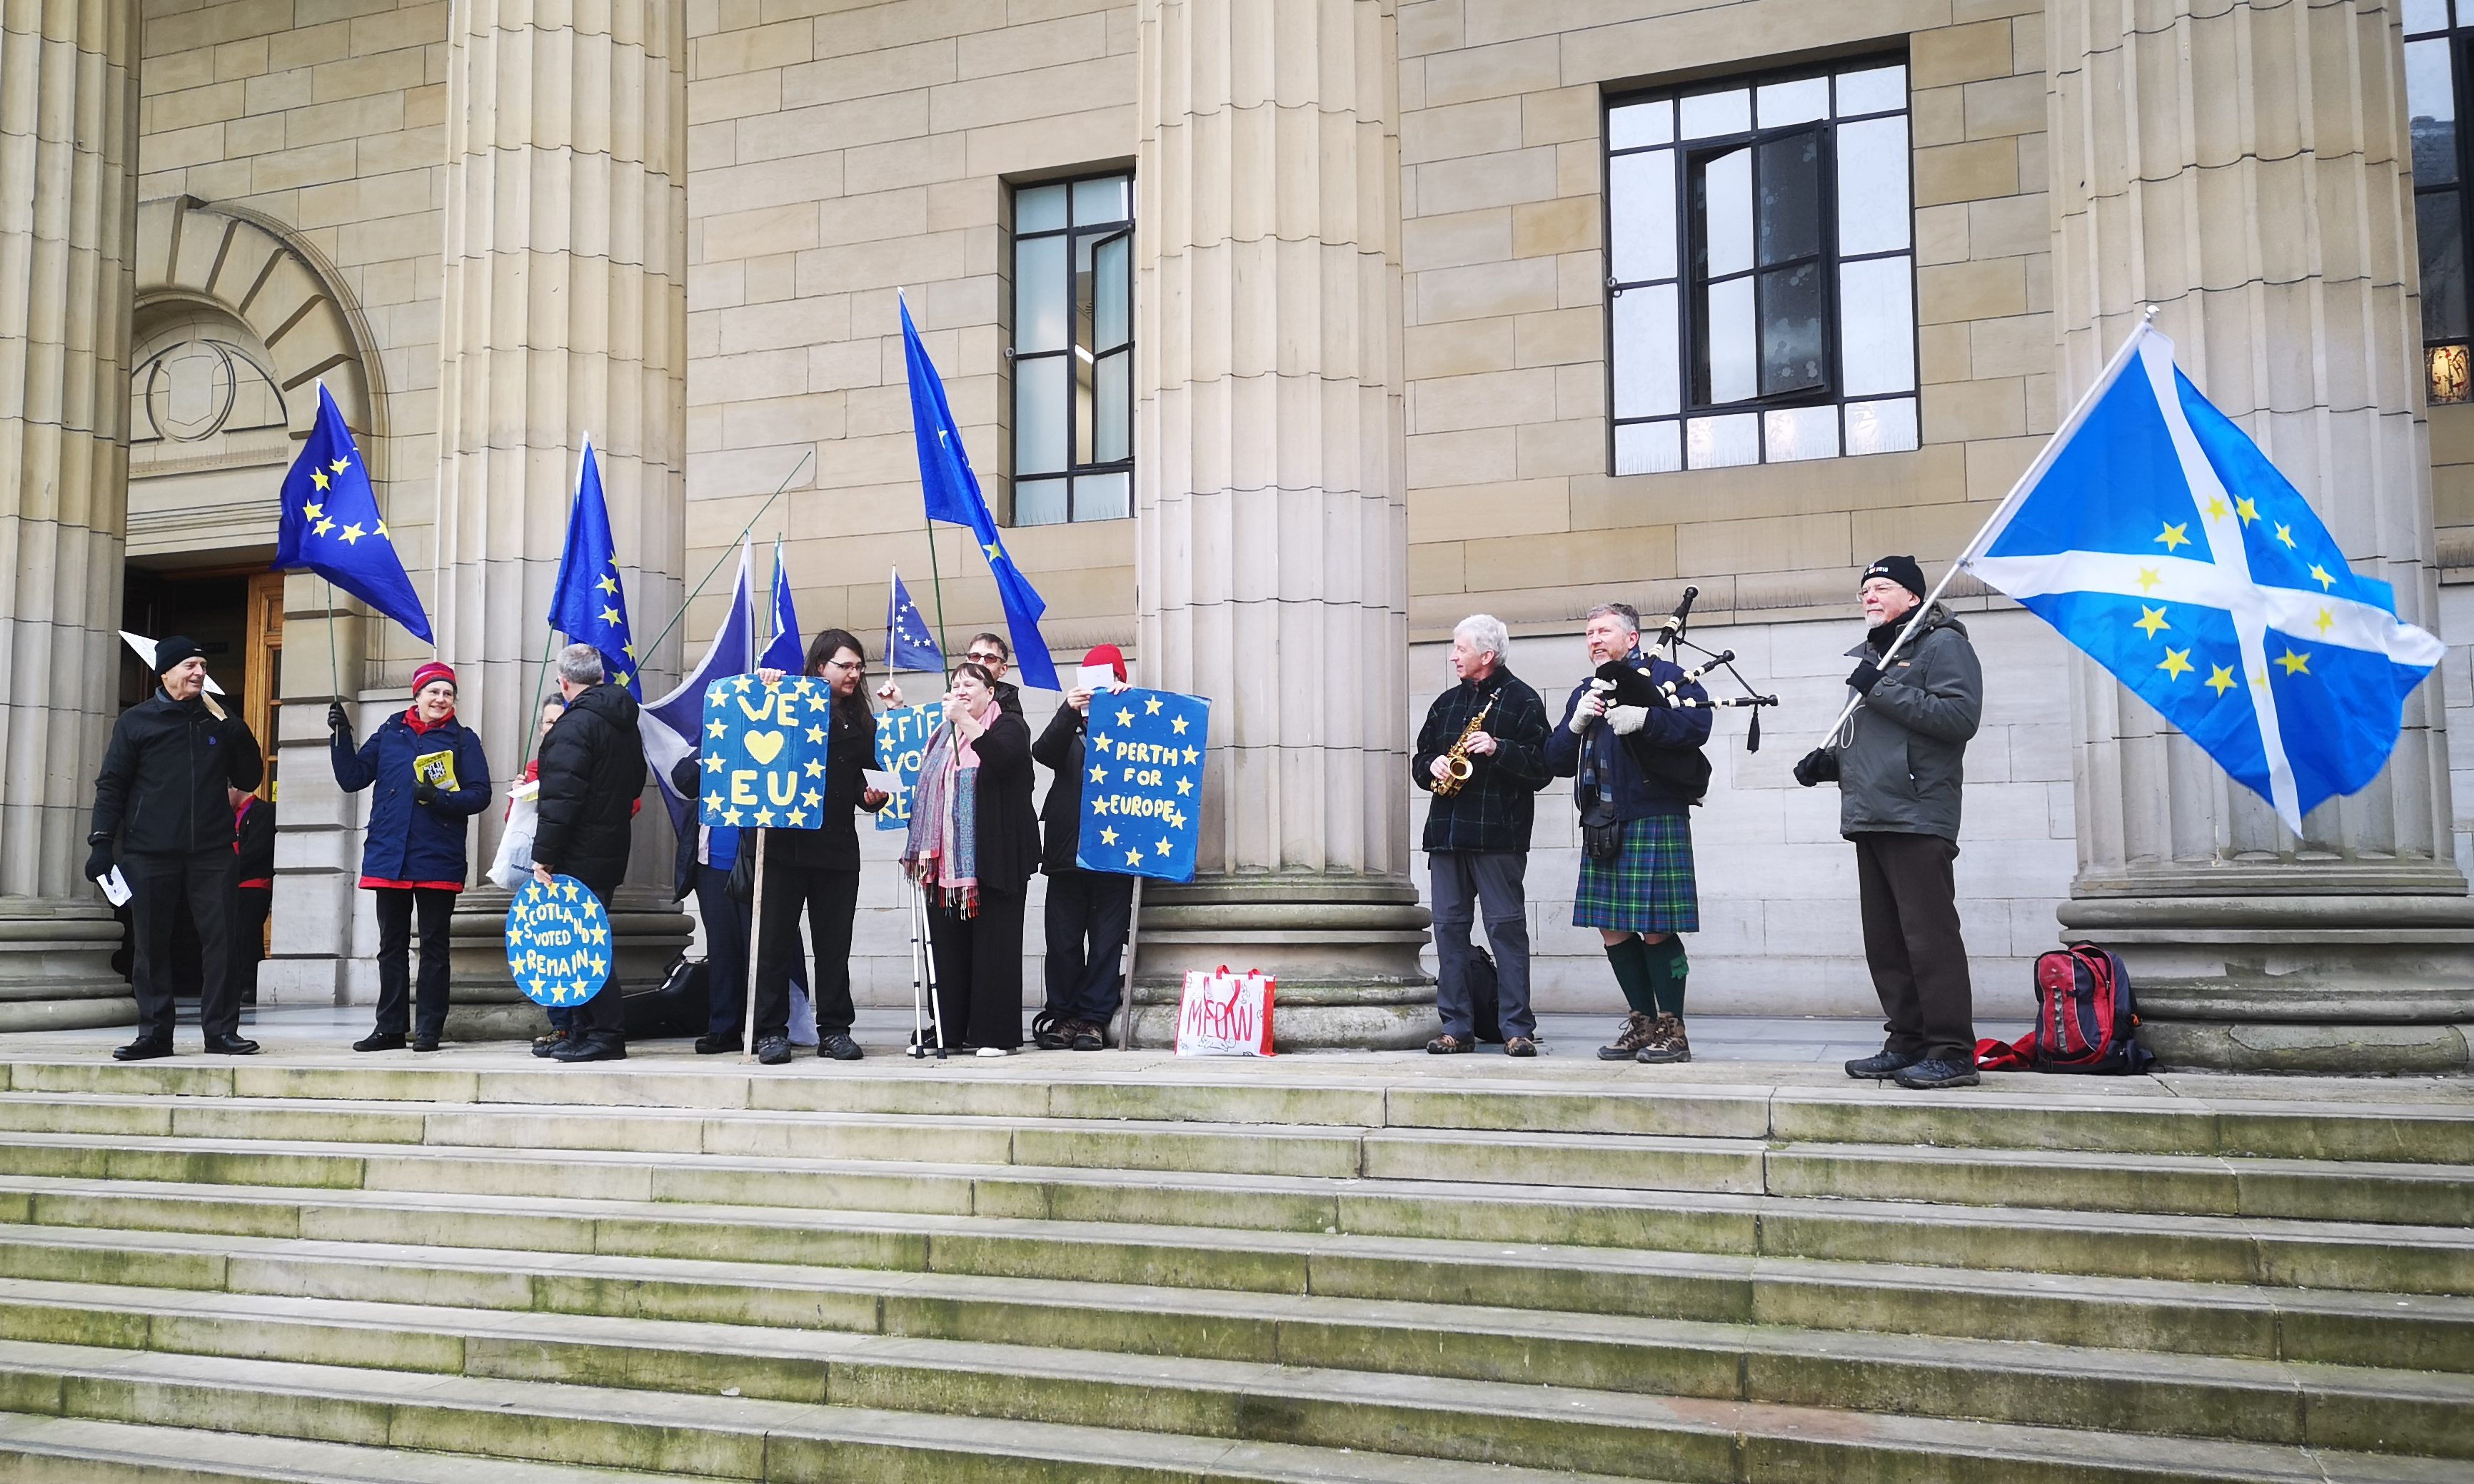 The pro-EU group outside the Caird Hall ahead of the Scottish Labour conference.